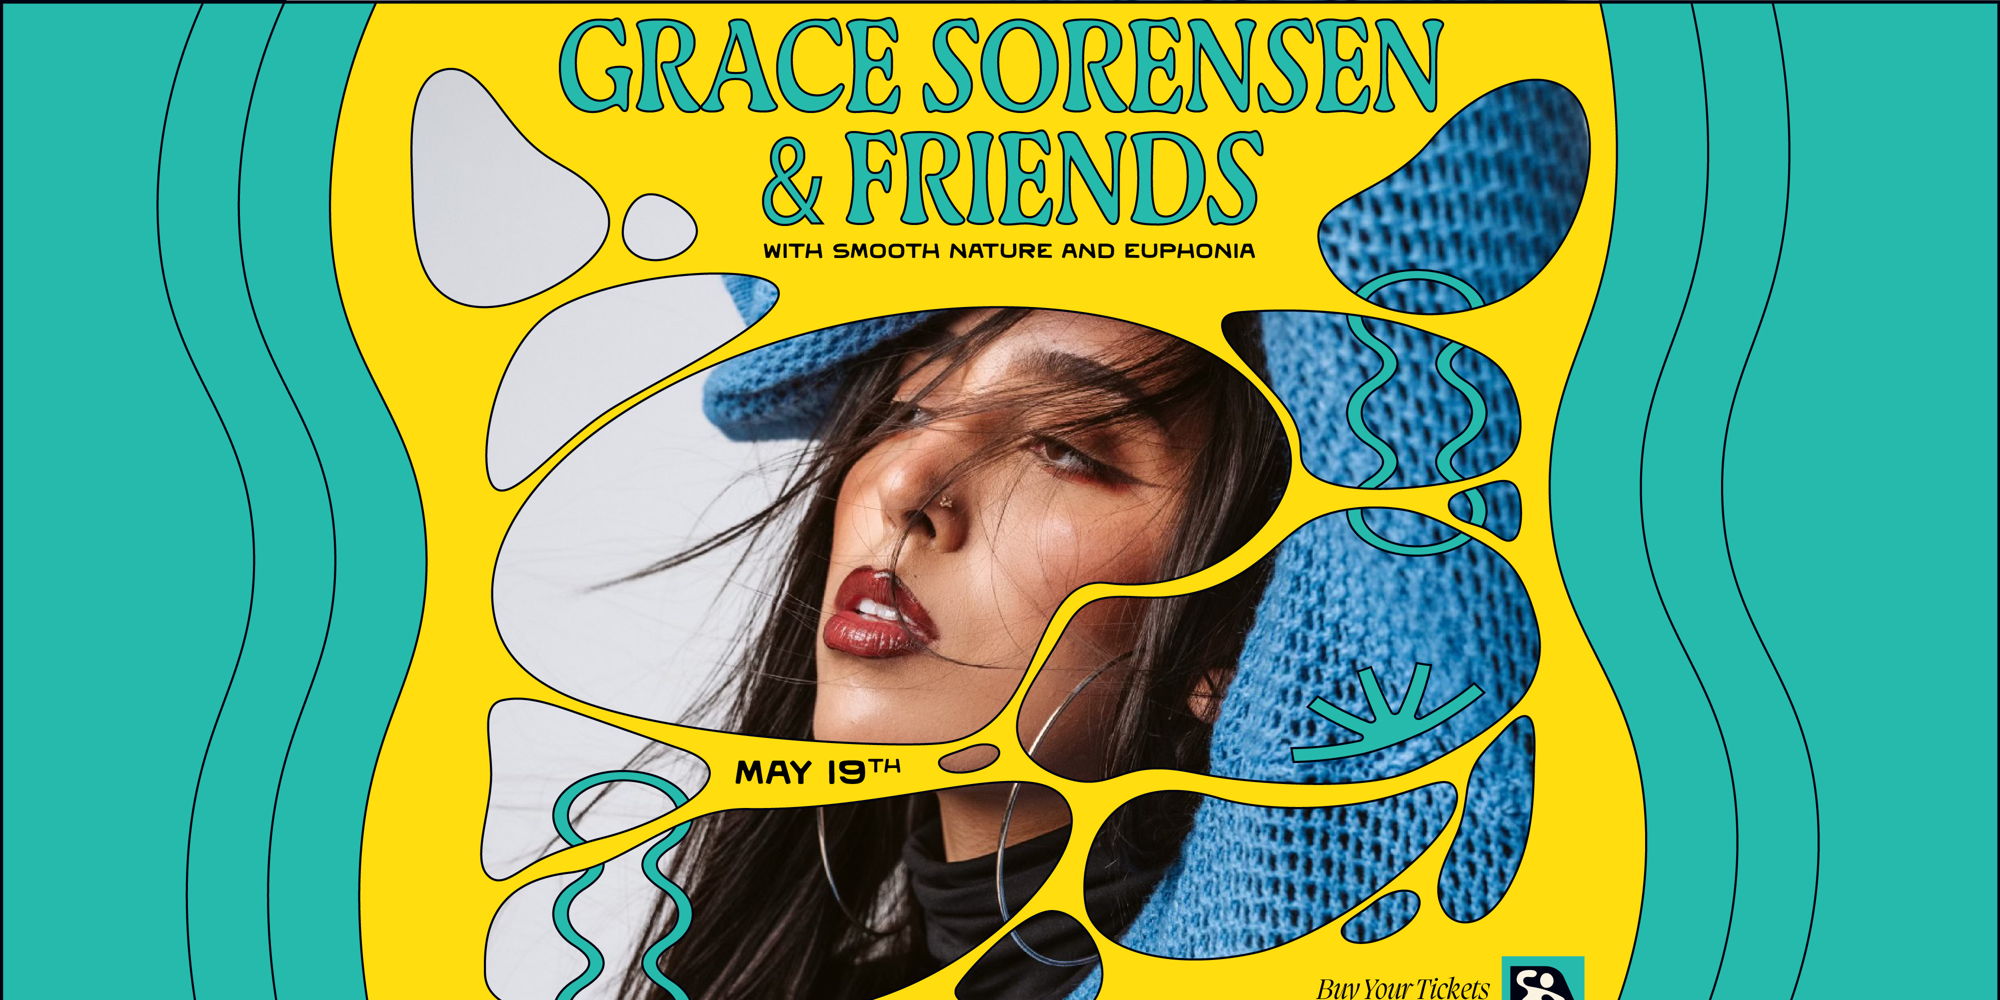 Parish Presents: An Evening with Grace Sorensen w/ Smooth Nature & Euphonia at Parish on 5/19 promotional image